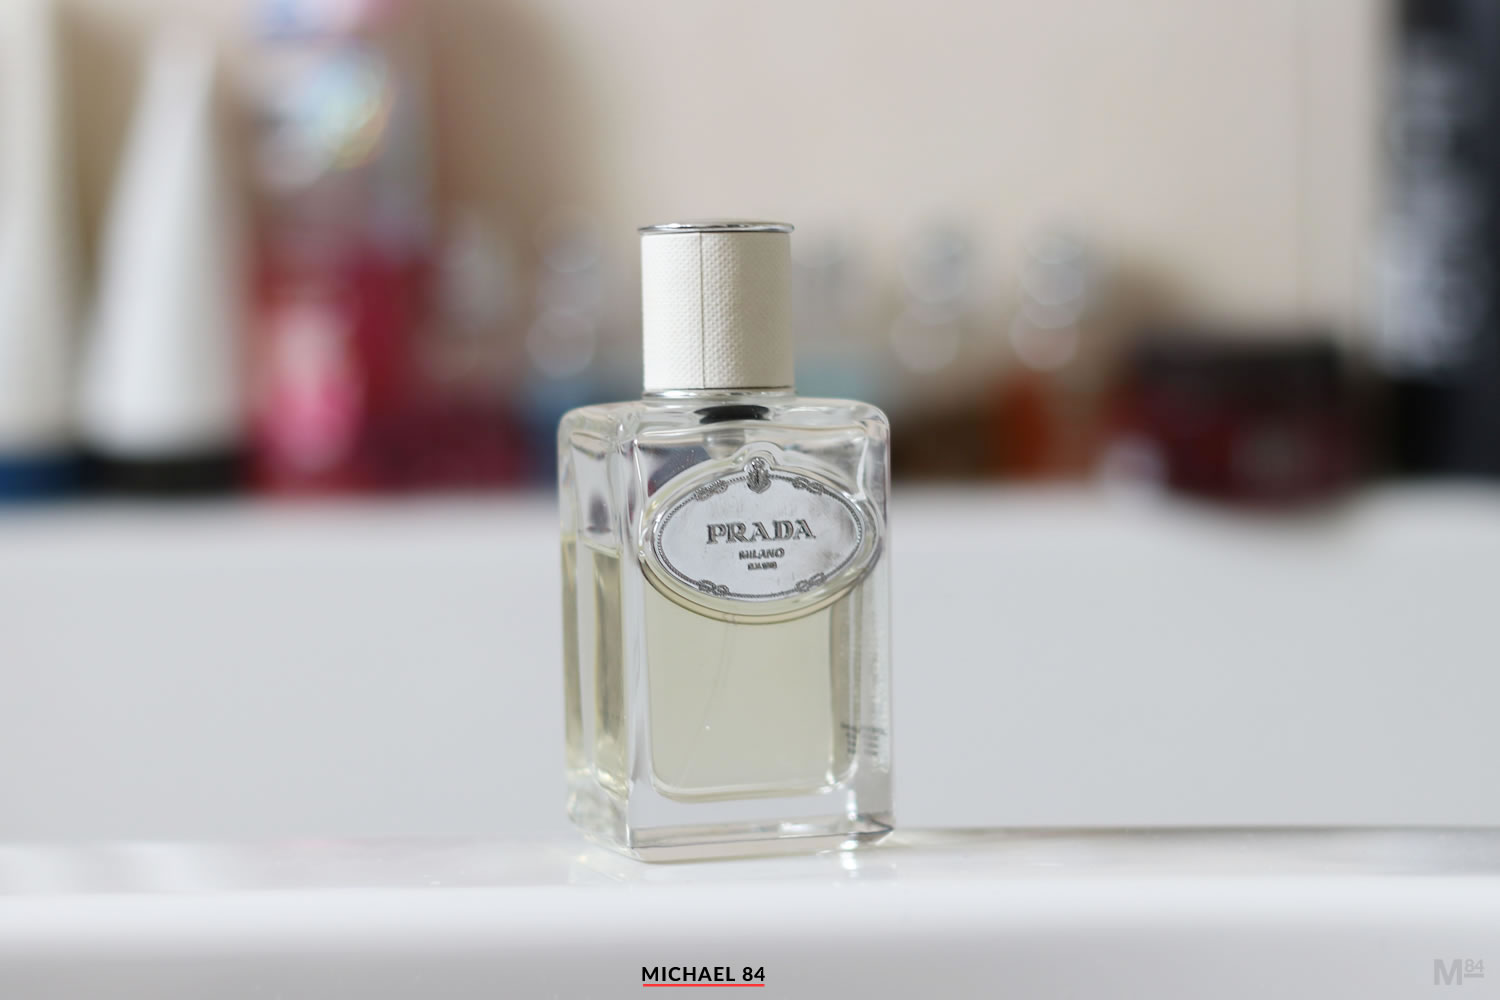 https://static1.michael84.co.uk/wp-content/uploads/prada-infusion-dhomme-fragrance-review-michael84.jpg